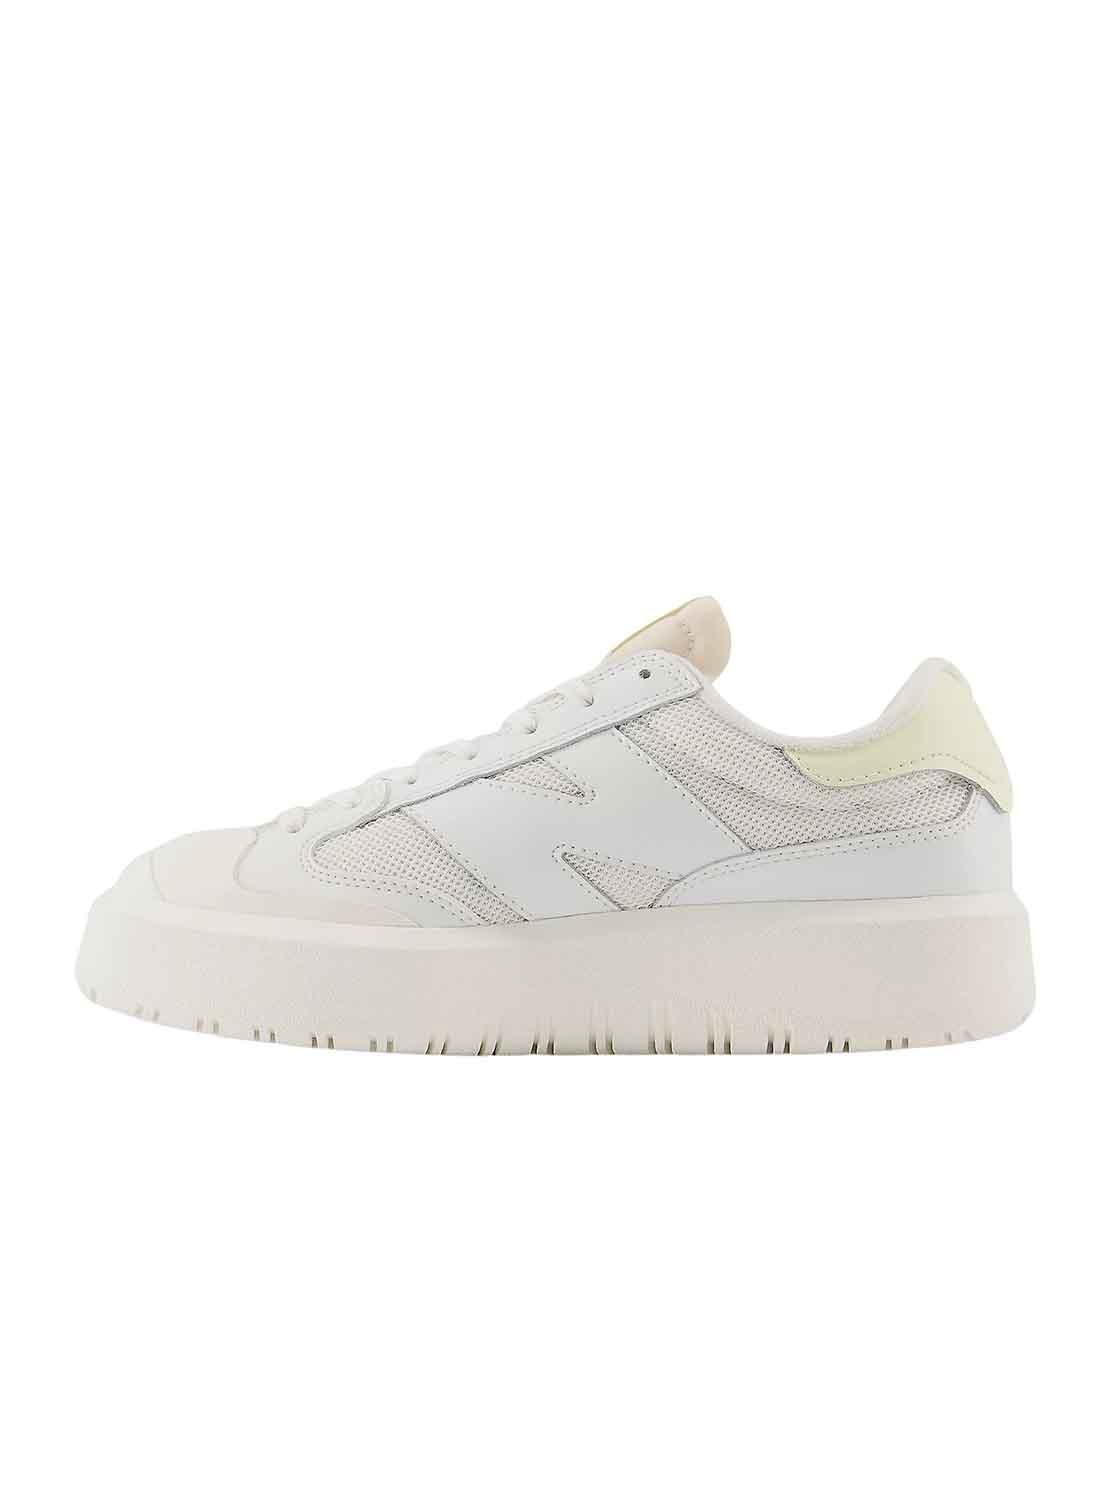 Sneakers New Balance CT302 Bianco per Donna